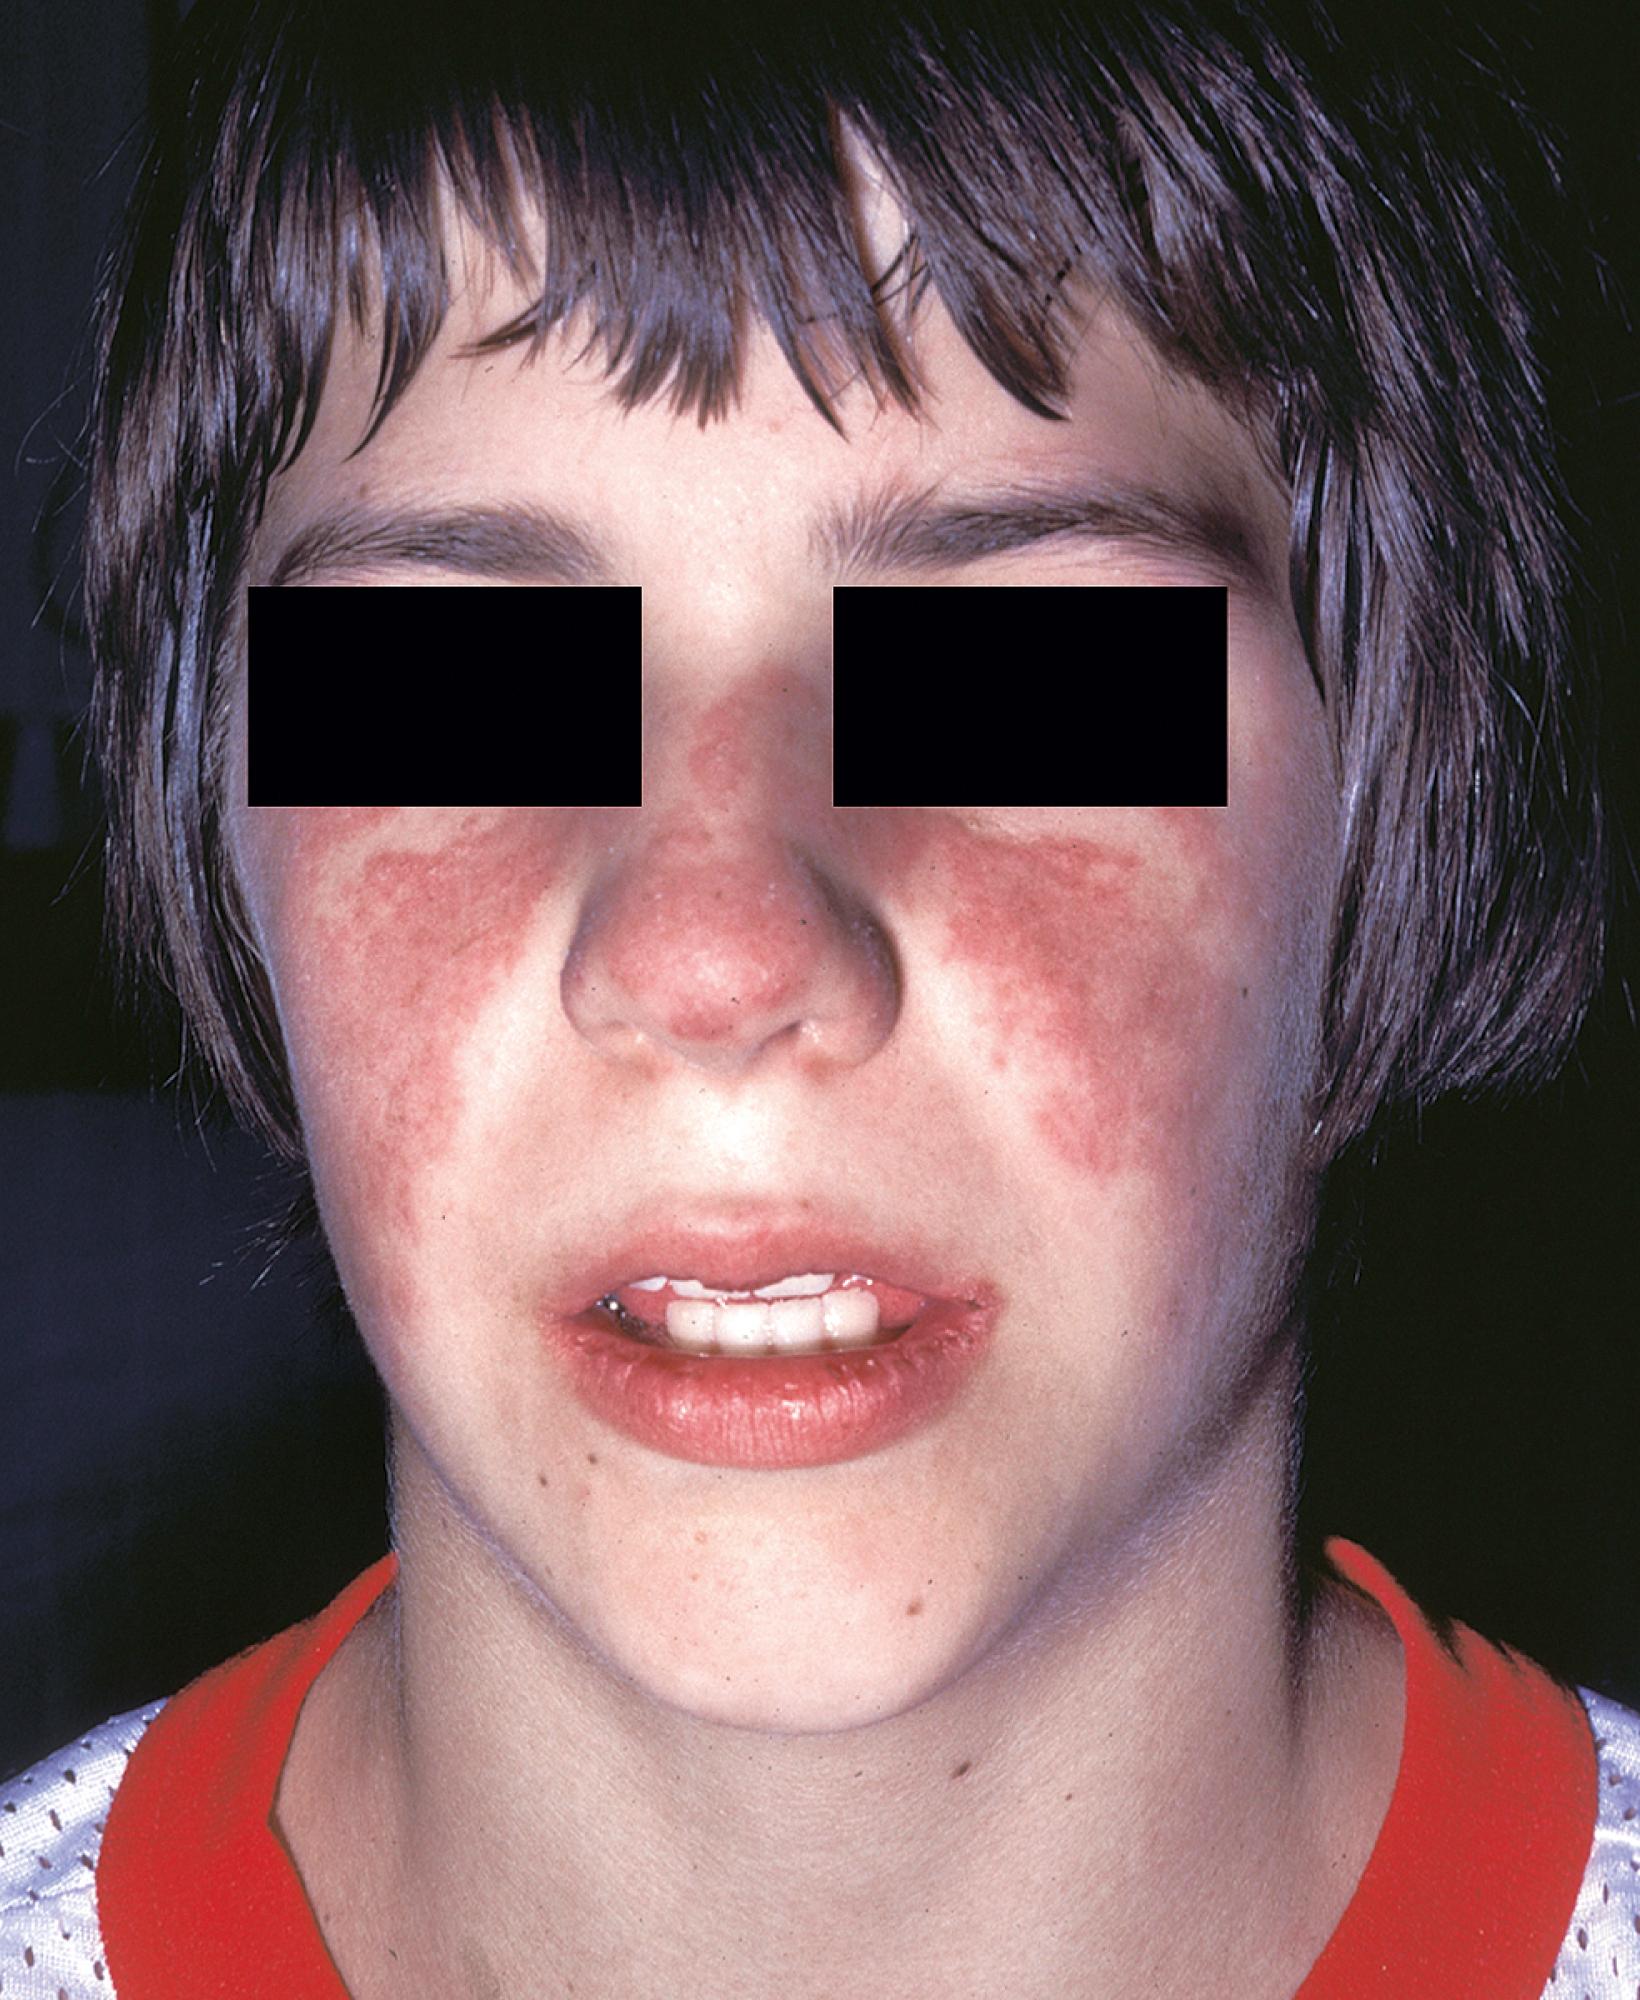 Fig. 23.9, Malar erythema of acute systemic lupus erythematosus. The classic butterfly rash has erupted over both cheeks and spread over the bridge of the nose. It may be punctate and follicular or an erythematous blush. The rash does not leave a scar.